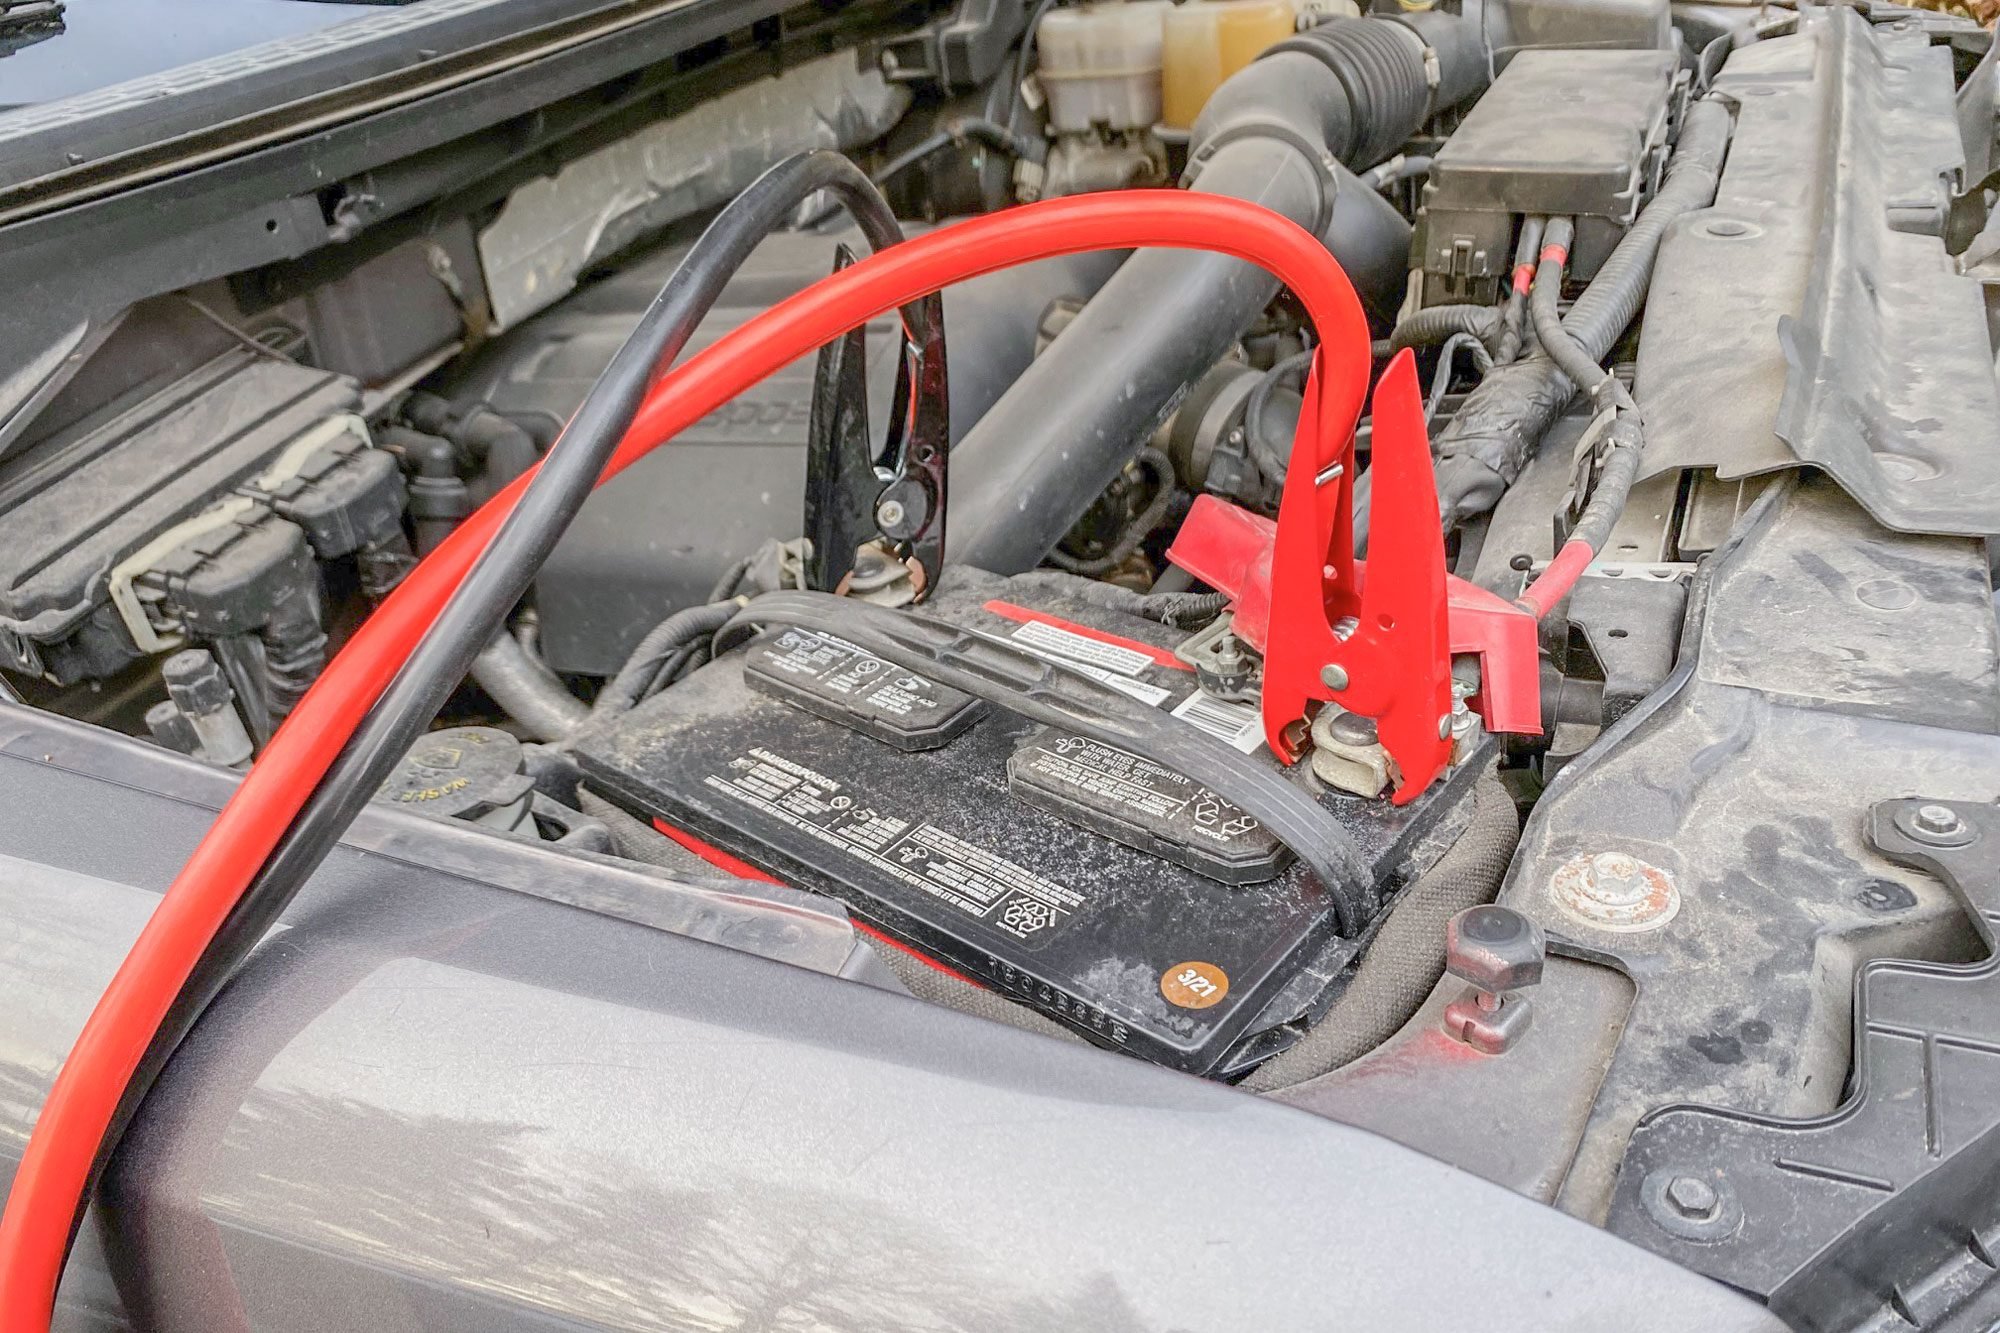 How to Jump Start Your Car In 5 Easy Steps - Car and Driver